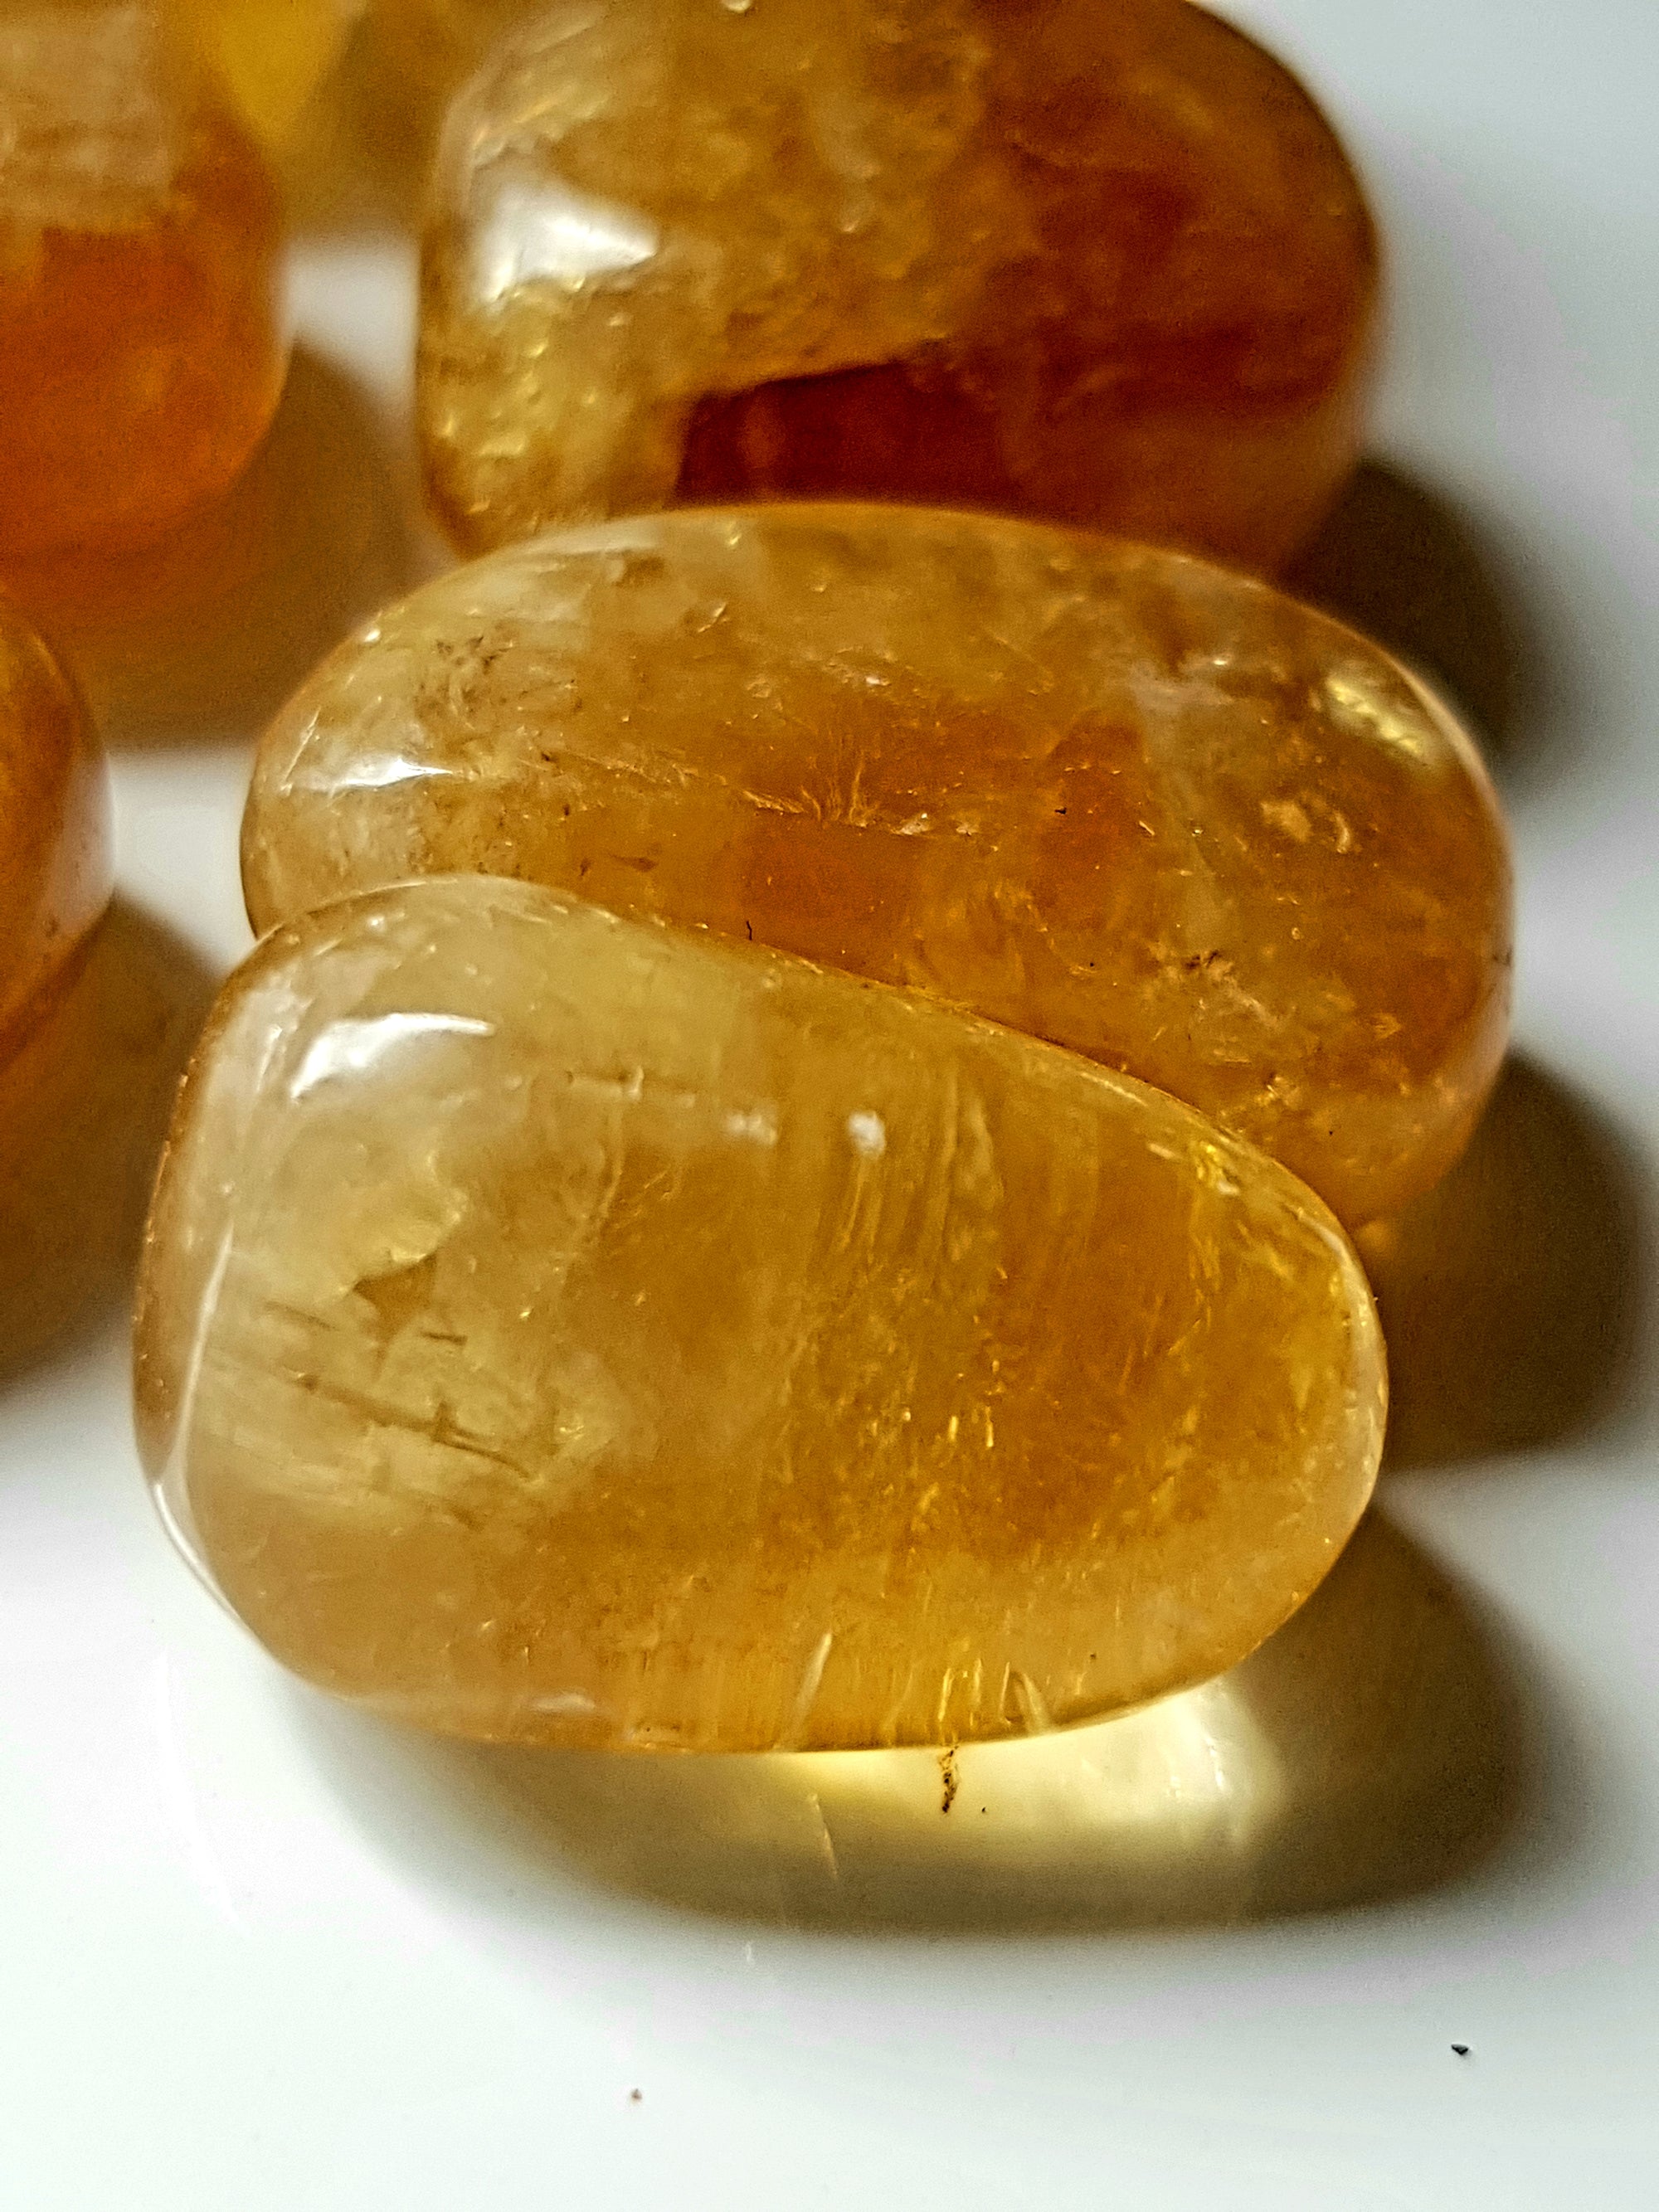 three tumbled pieces of honey coloured calcite. The pieces are very translucent and light is projected through them to give a golden glow on the surface beneath.